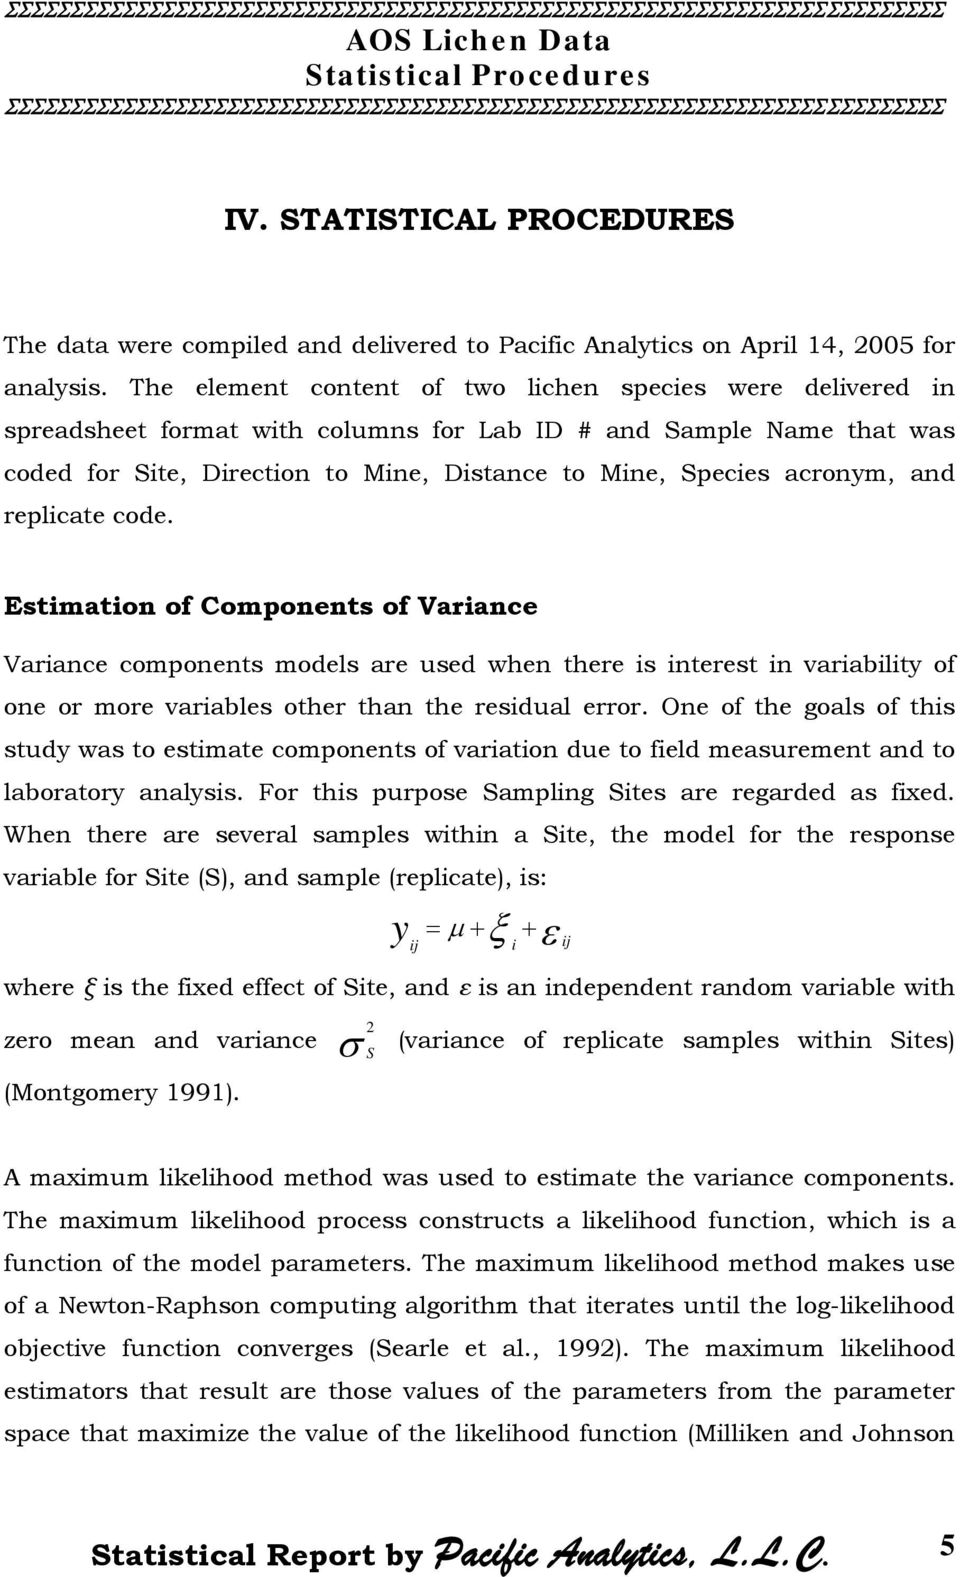 and replicate code. Estimation of Components of Variance Variance components models are used when there is interest in variability of one or more variables other than the residual error.